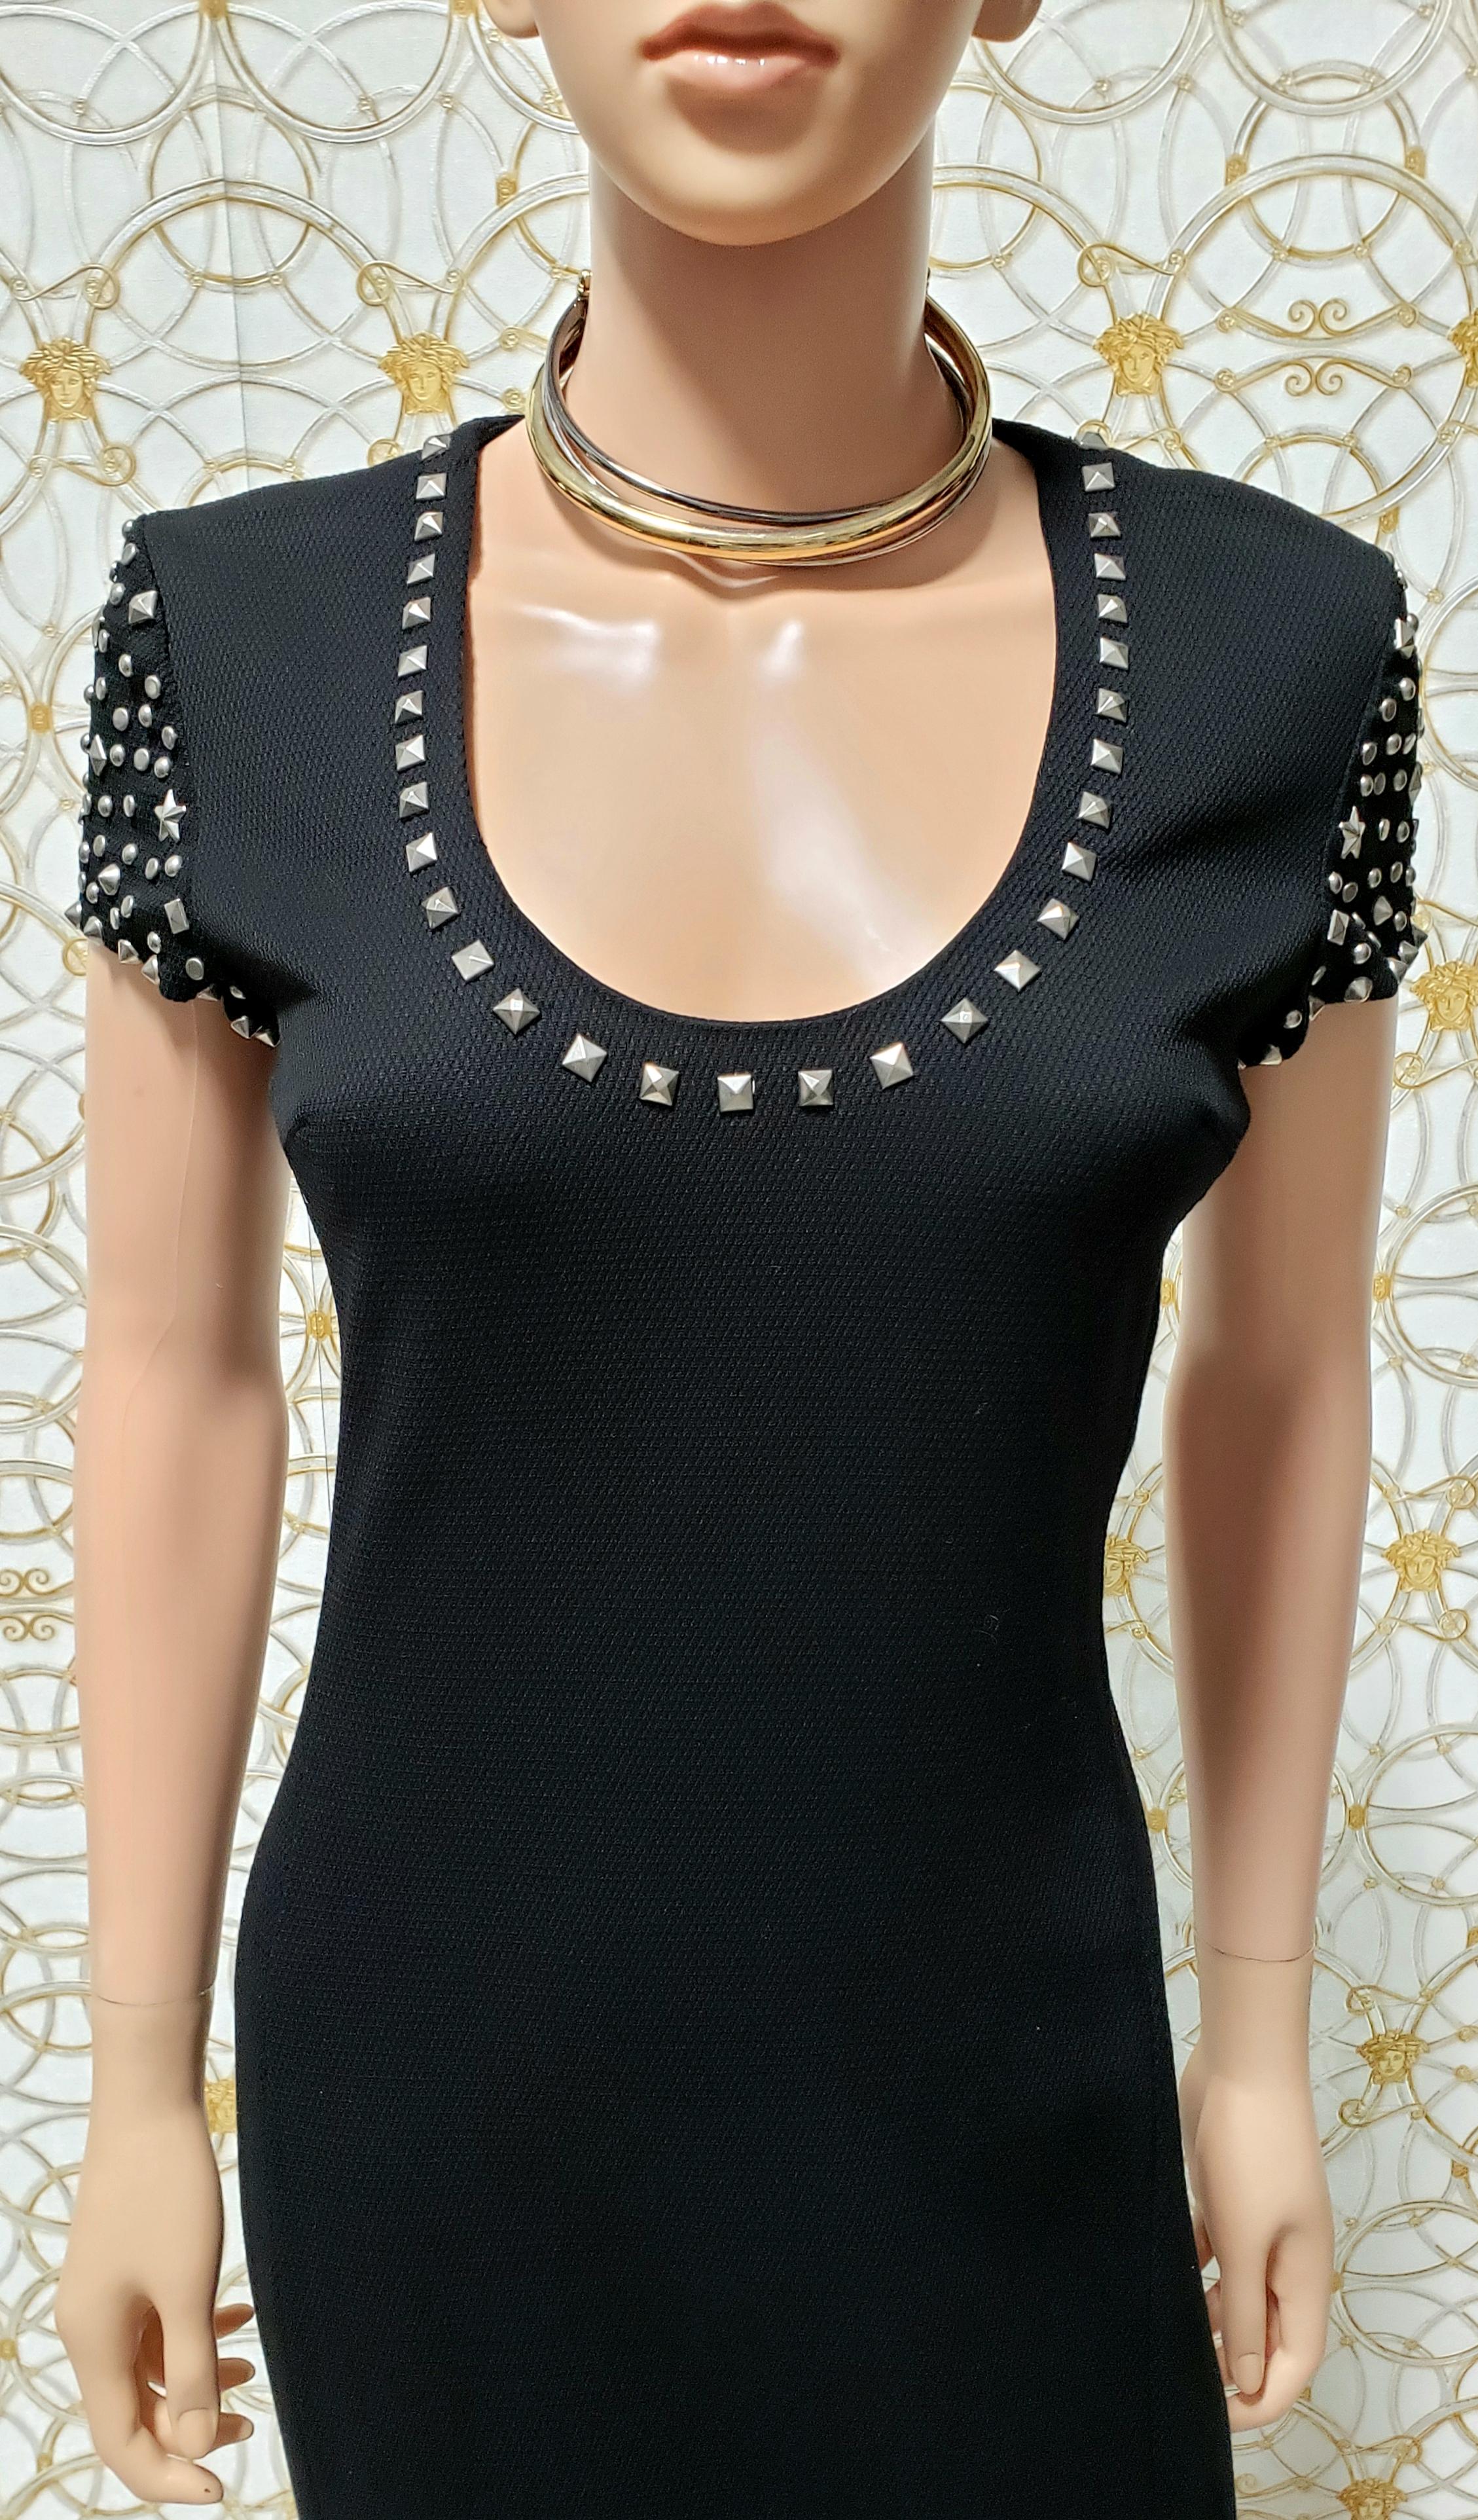 New GIANNI VERSACE COUTURE BLACK STUDDED DRESS 38 - 2, 40 - 4 For Sale 2